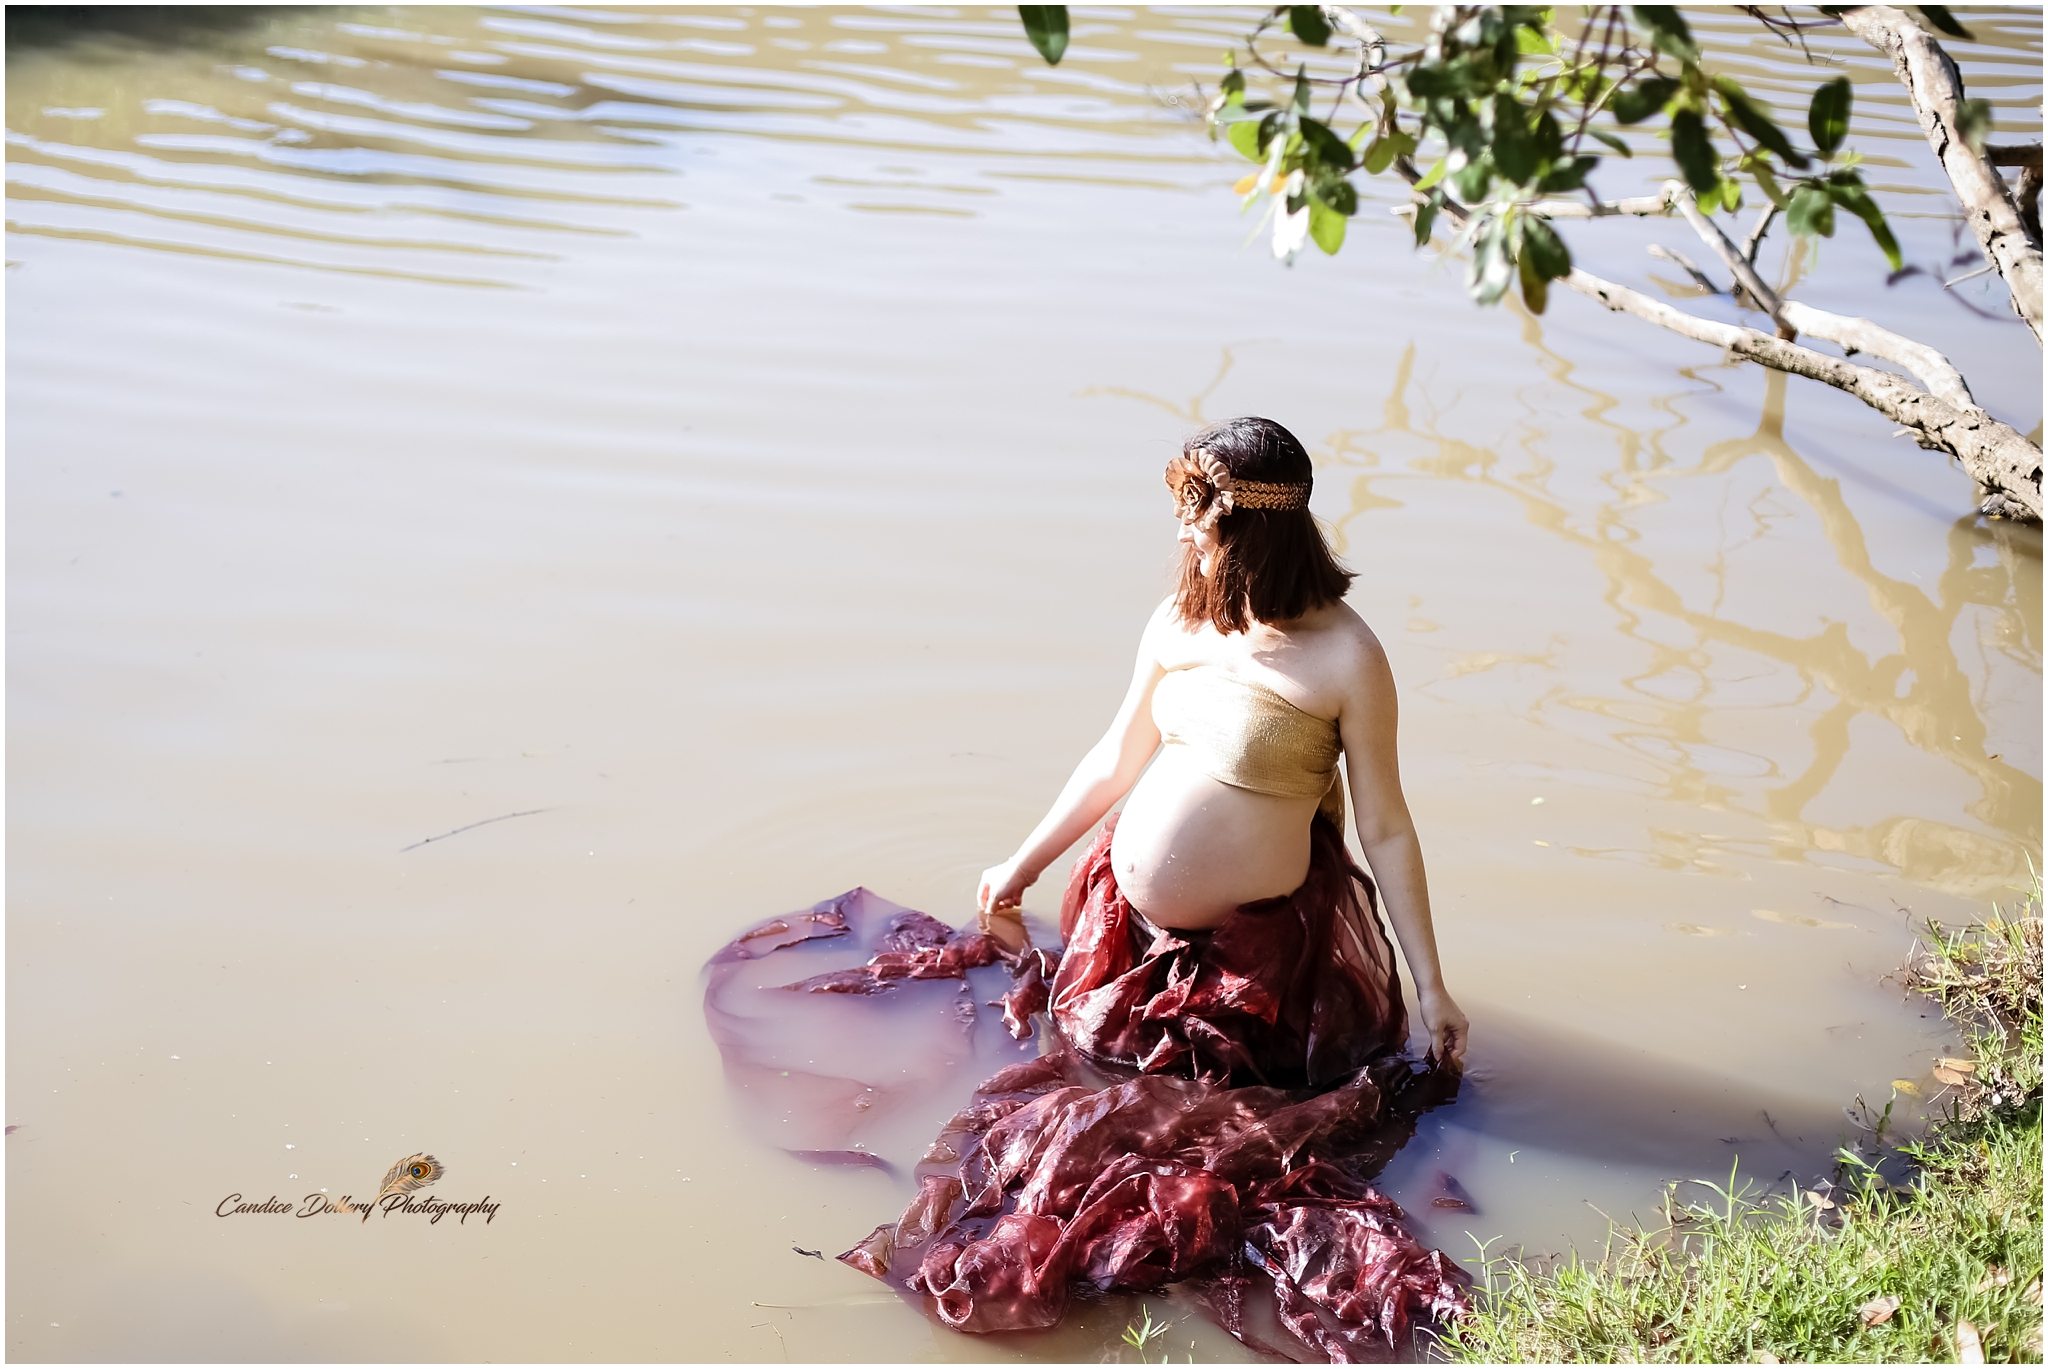 kirstys-maternity-candice-dollery-photography_1796